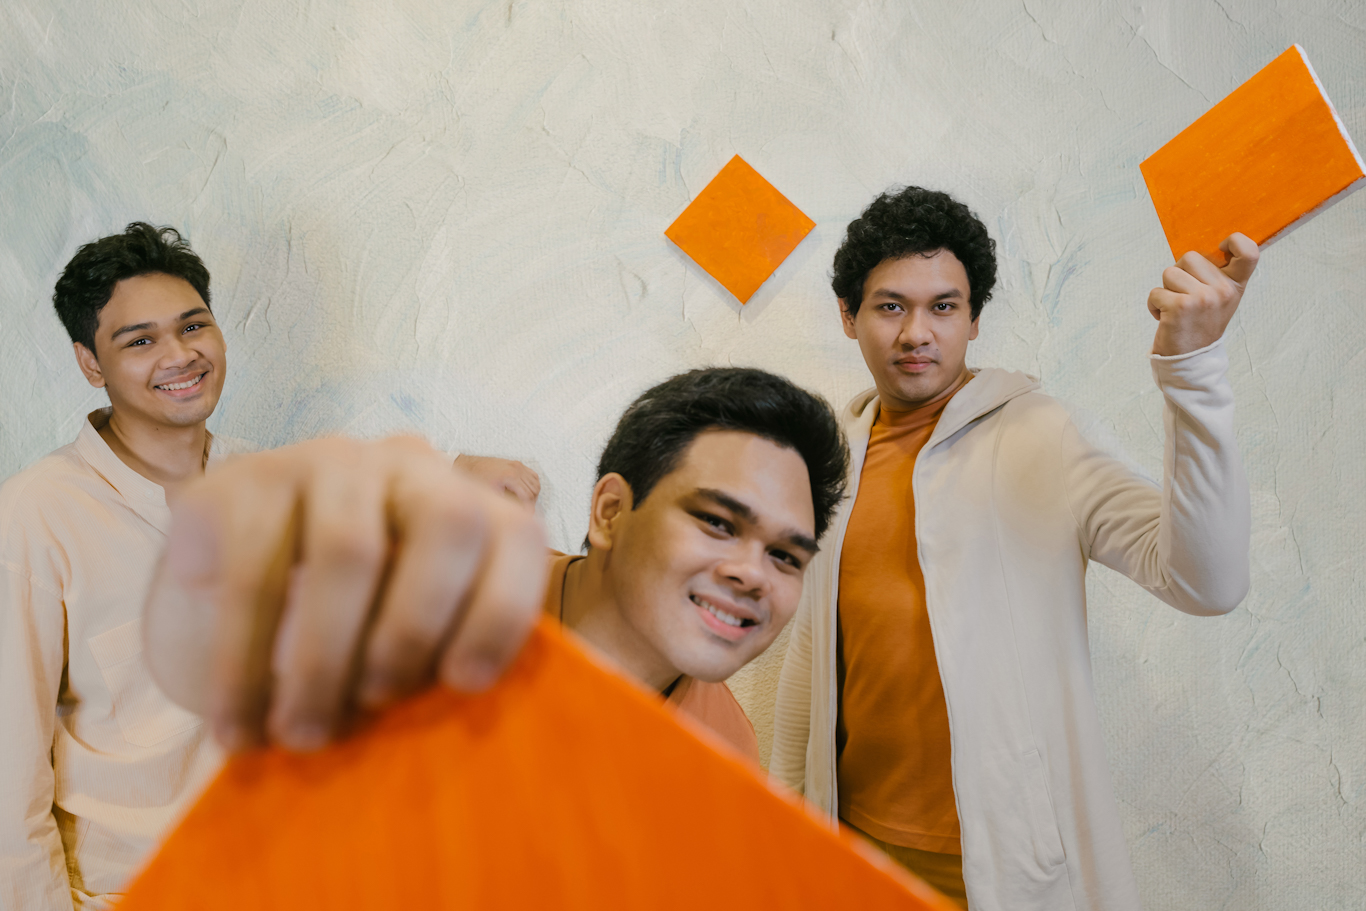 VIDEO PREMIERE: The Overtunes - Write Me Another Song 